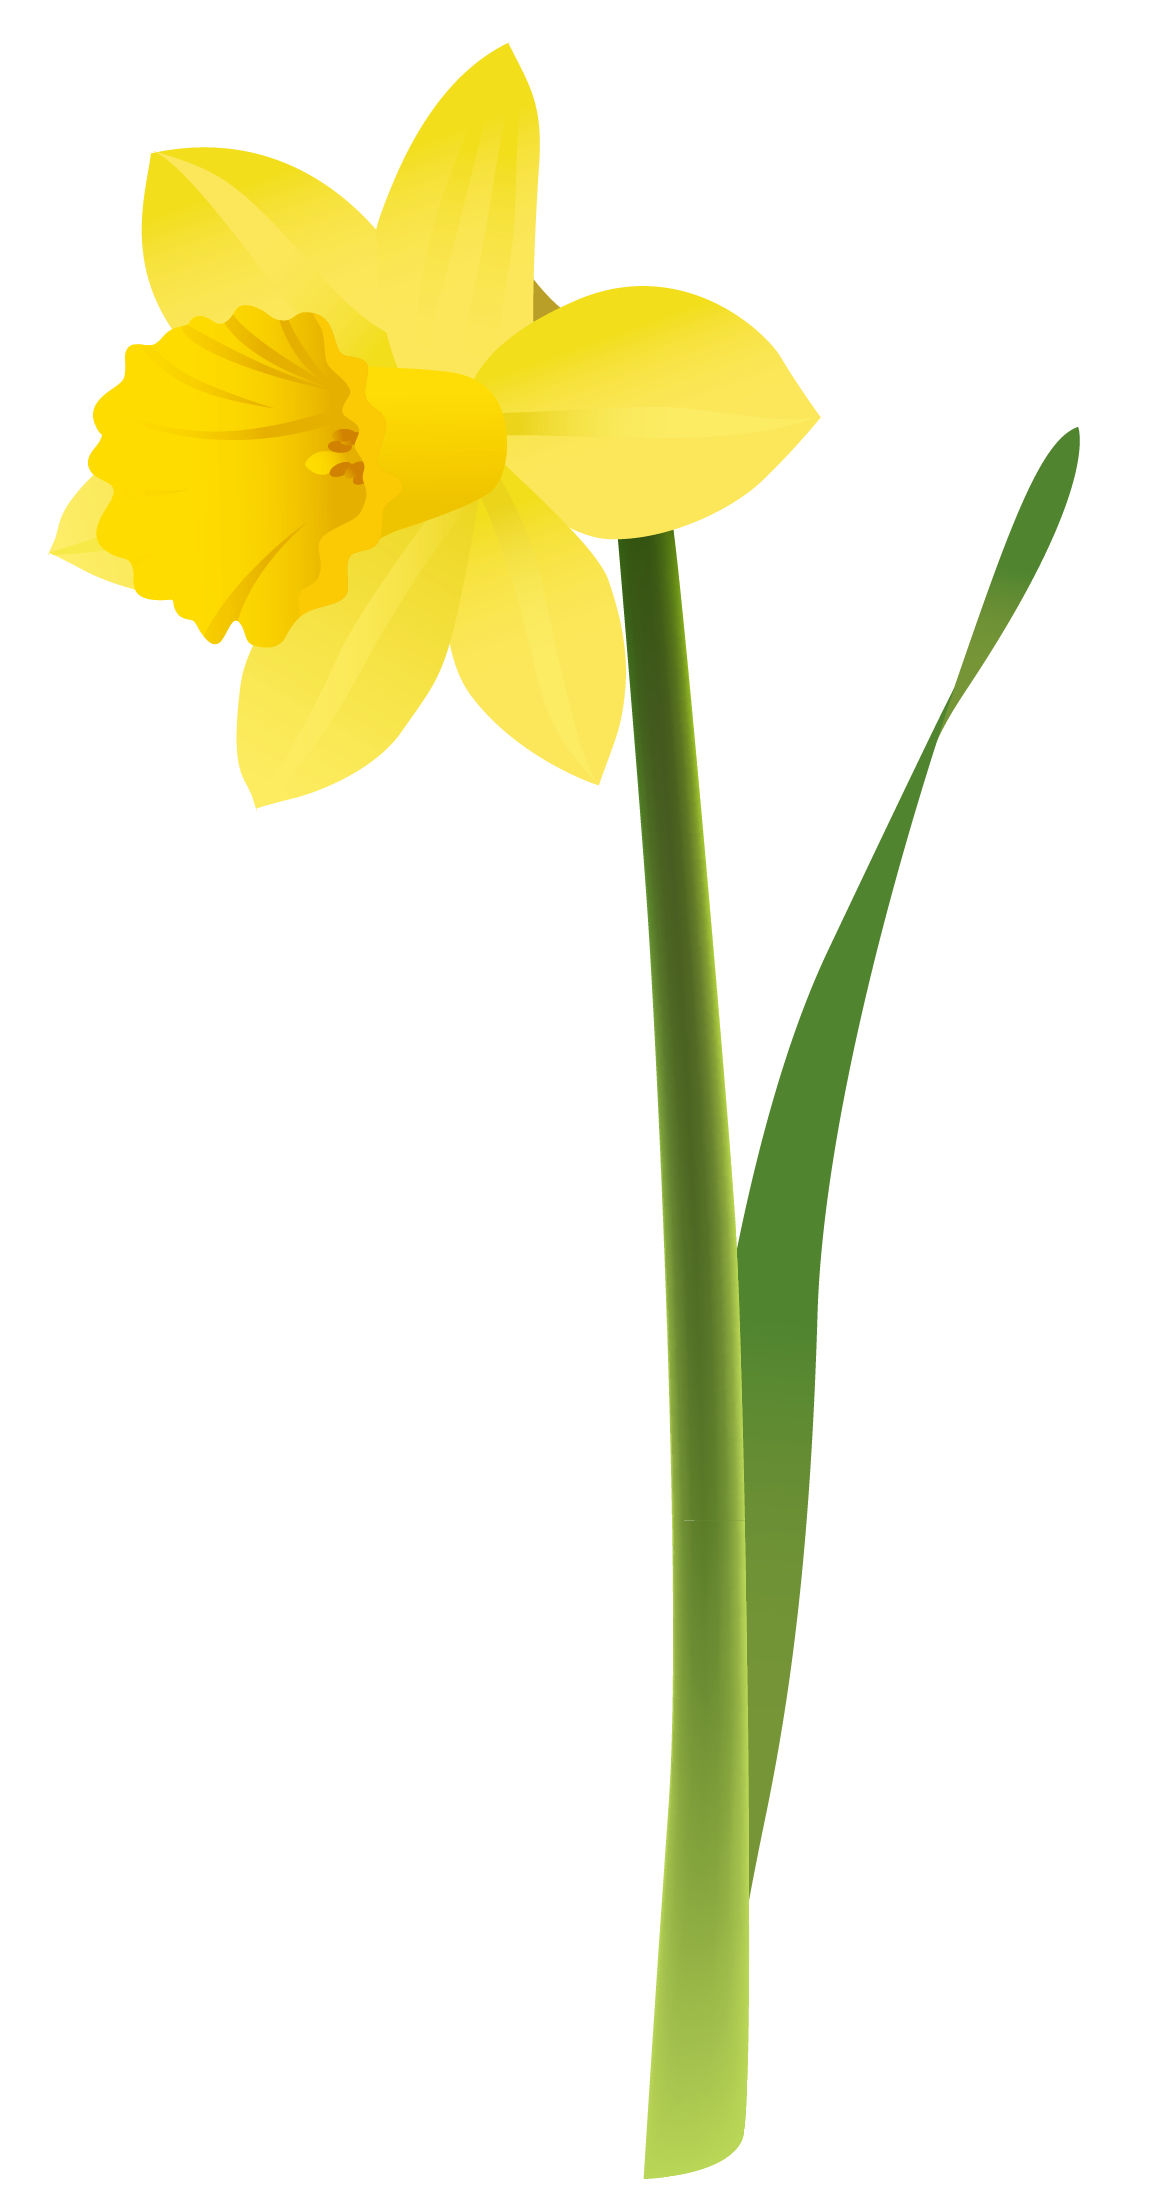 Spring Yellow Daffodil PNG Clipart